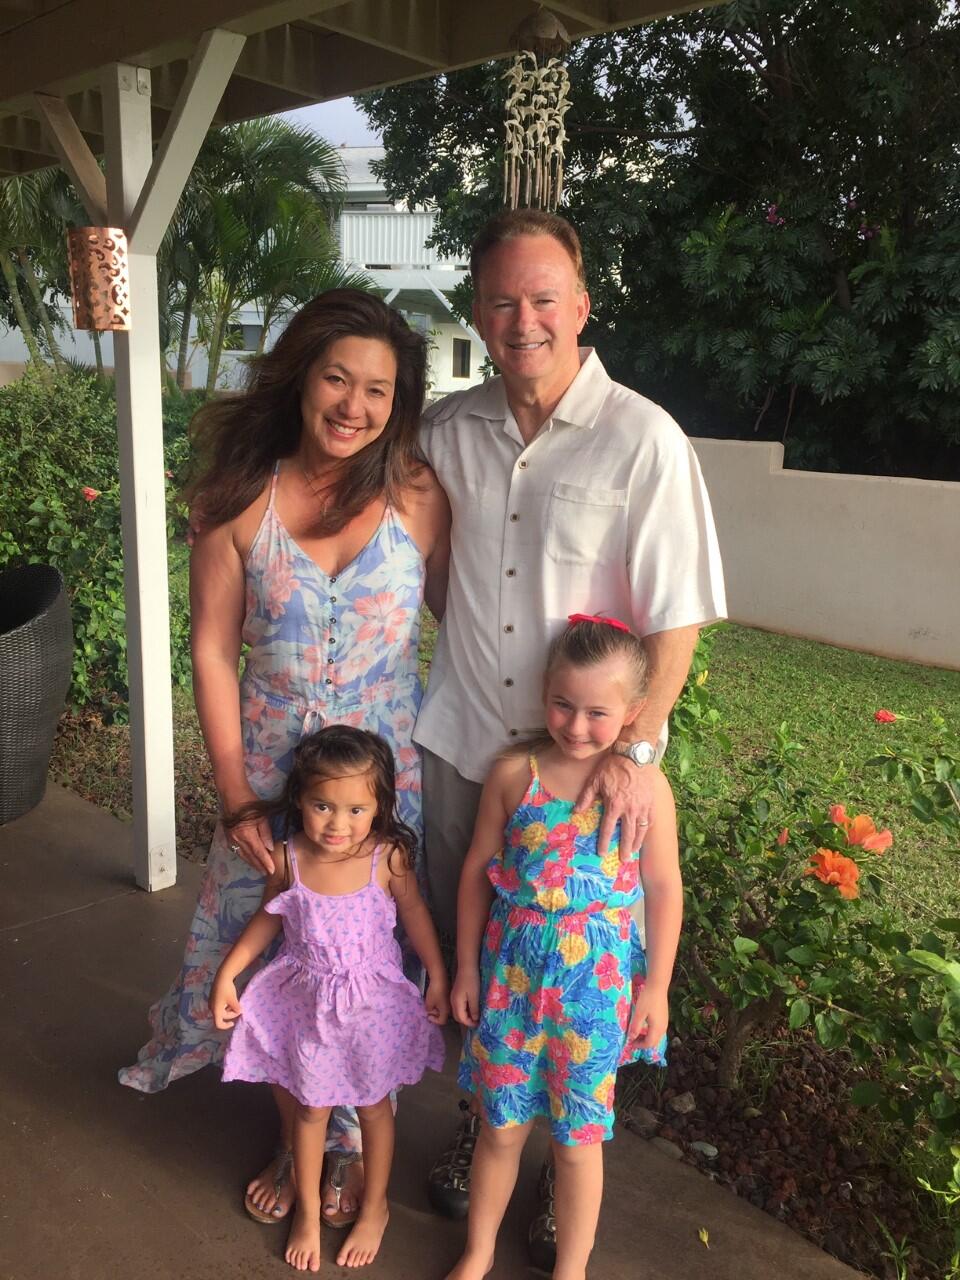 Poppy Bank new Senior Vice President Mike Cary wants to leave a better planet for his two girls, Makena and Raina, seen here with his wife, Lisa Nouchi, in a photo taken by their nanny, Samantha.